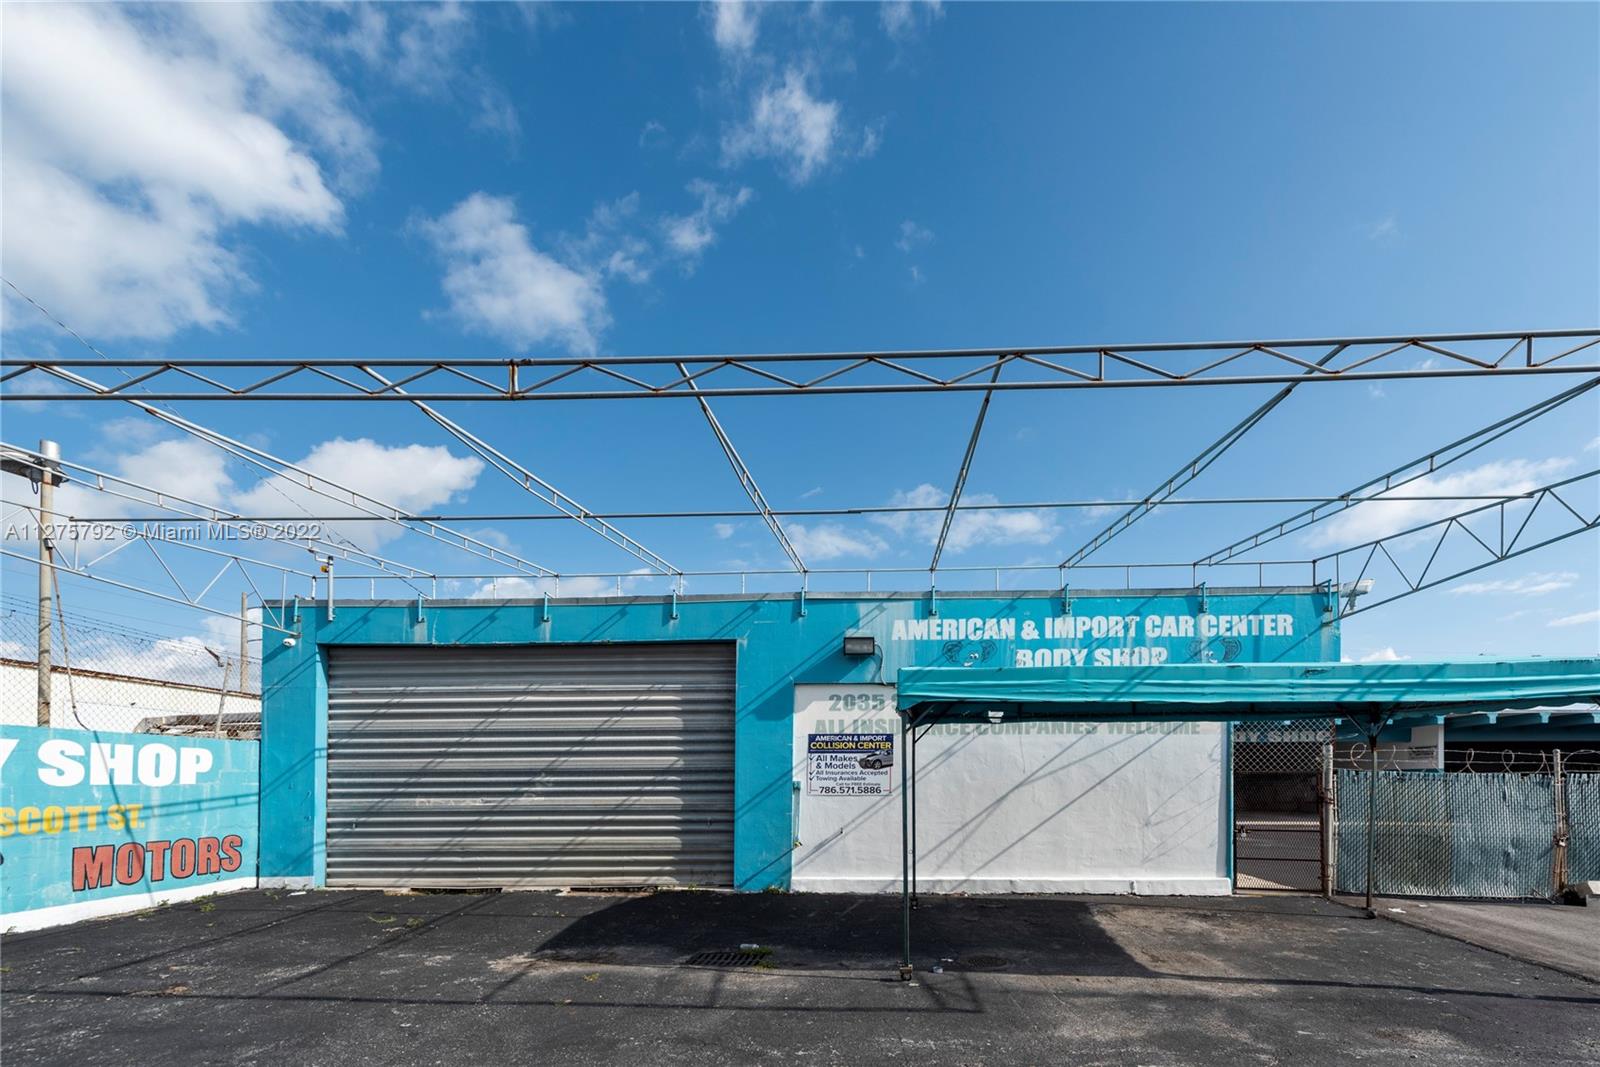 Excellent opportunity to lease an 11,000 SF distribution warehouse.? All business collision equipment includes two paint booths, one for commercial vehicles.? Features a large lot for outdoor storage or parking.?

Call for additional information.?